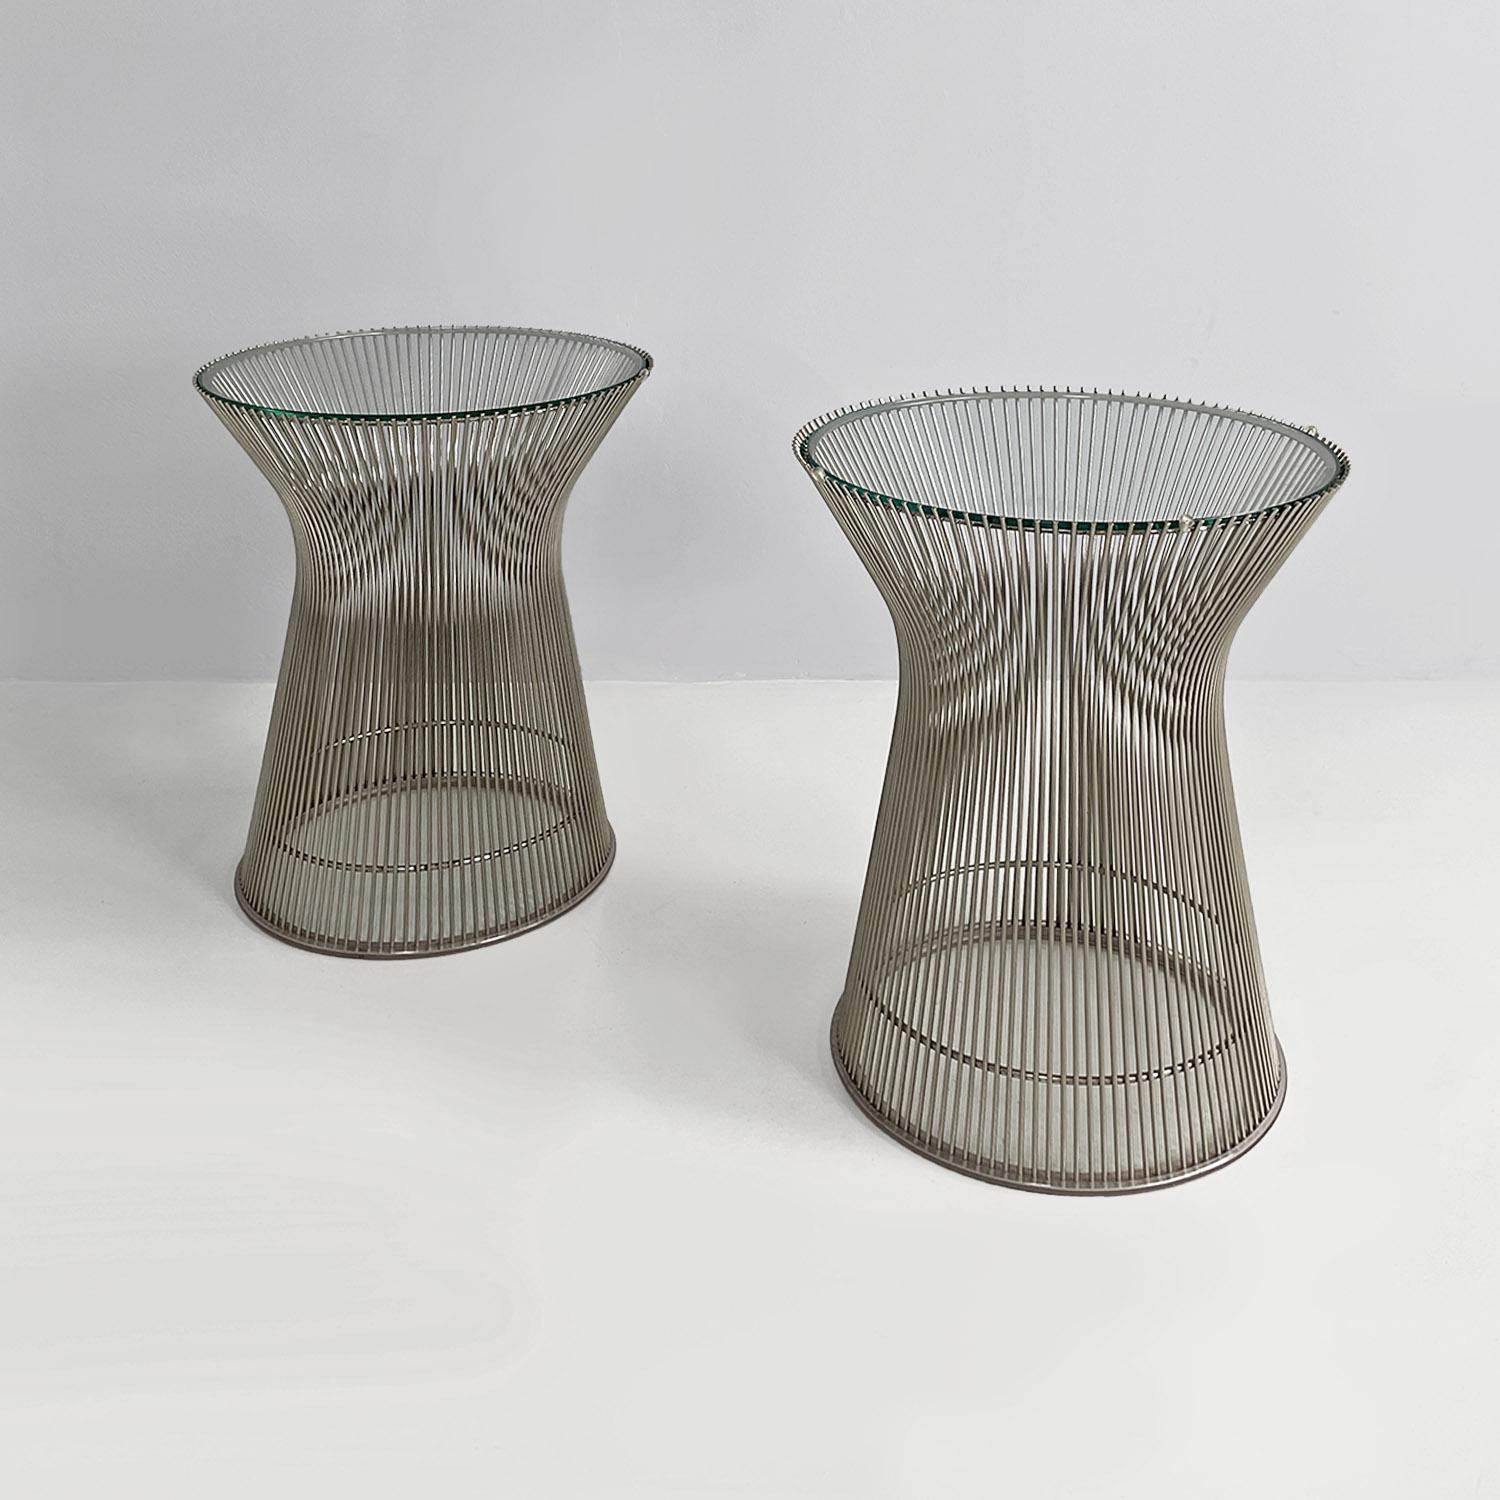 Modern American modern steel and crystal side tables by Warren Platner for Knoll, 1966 For Sale